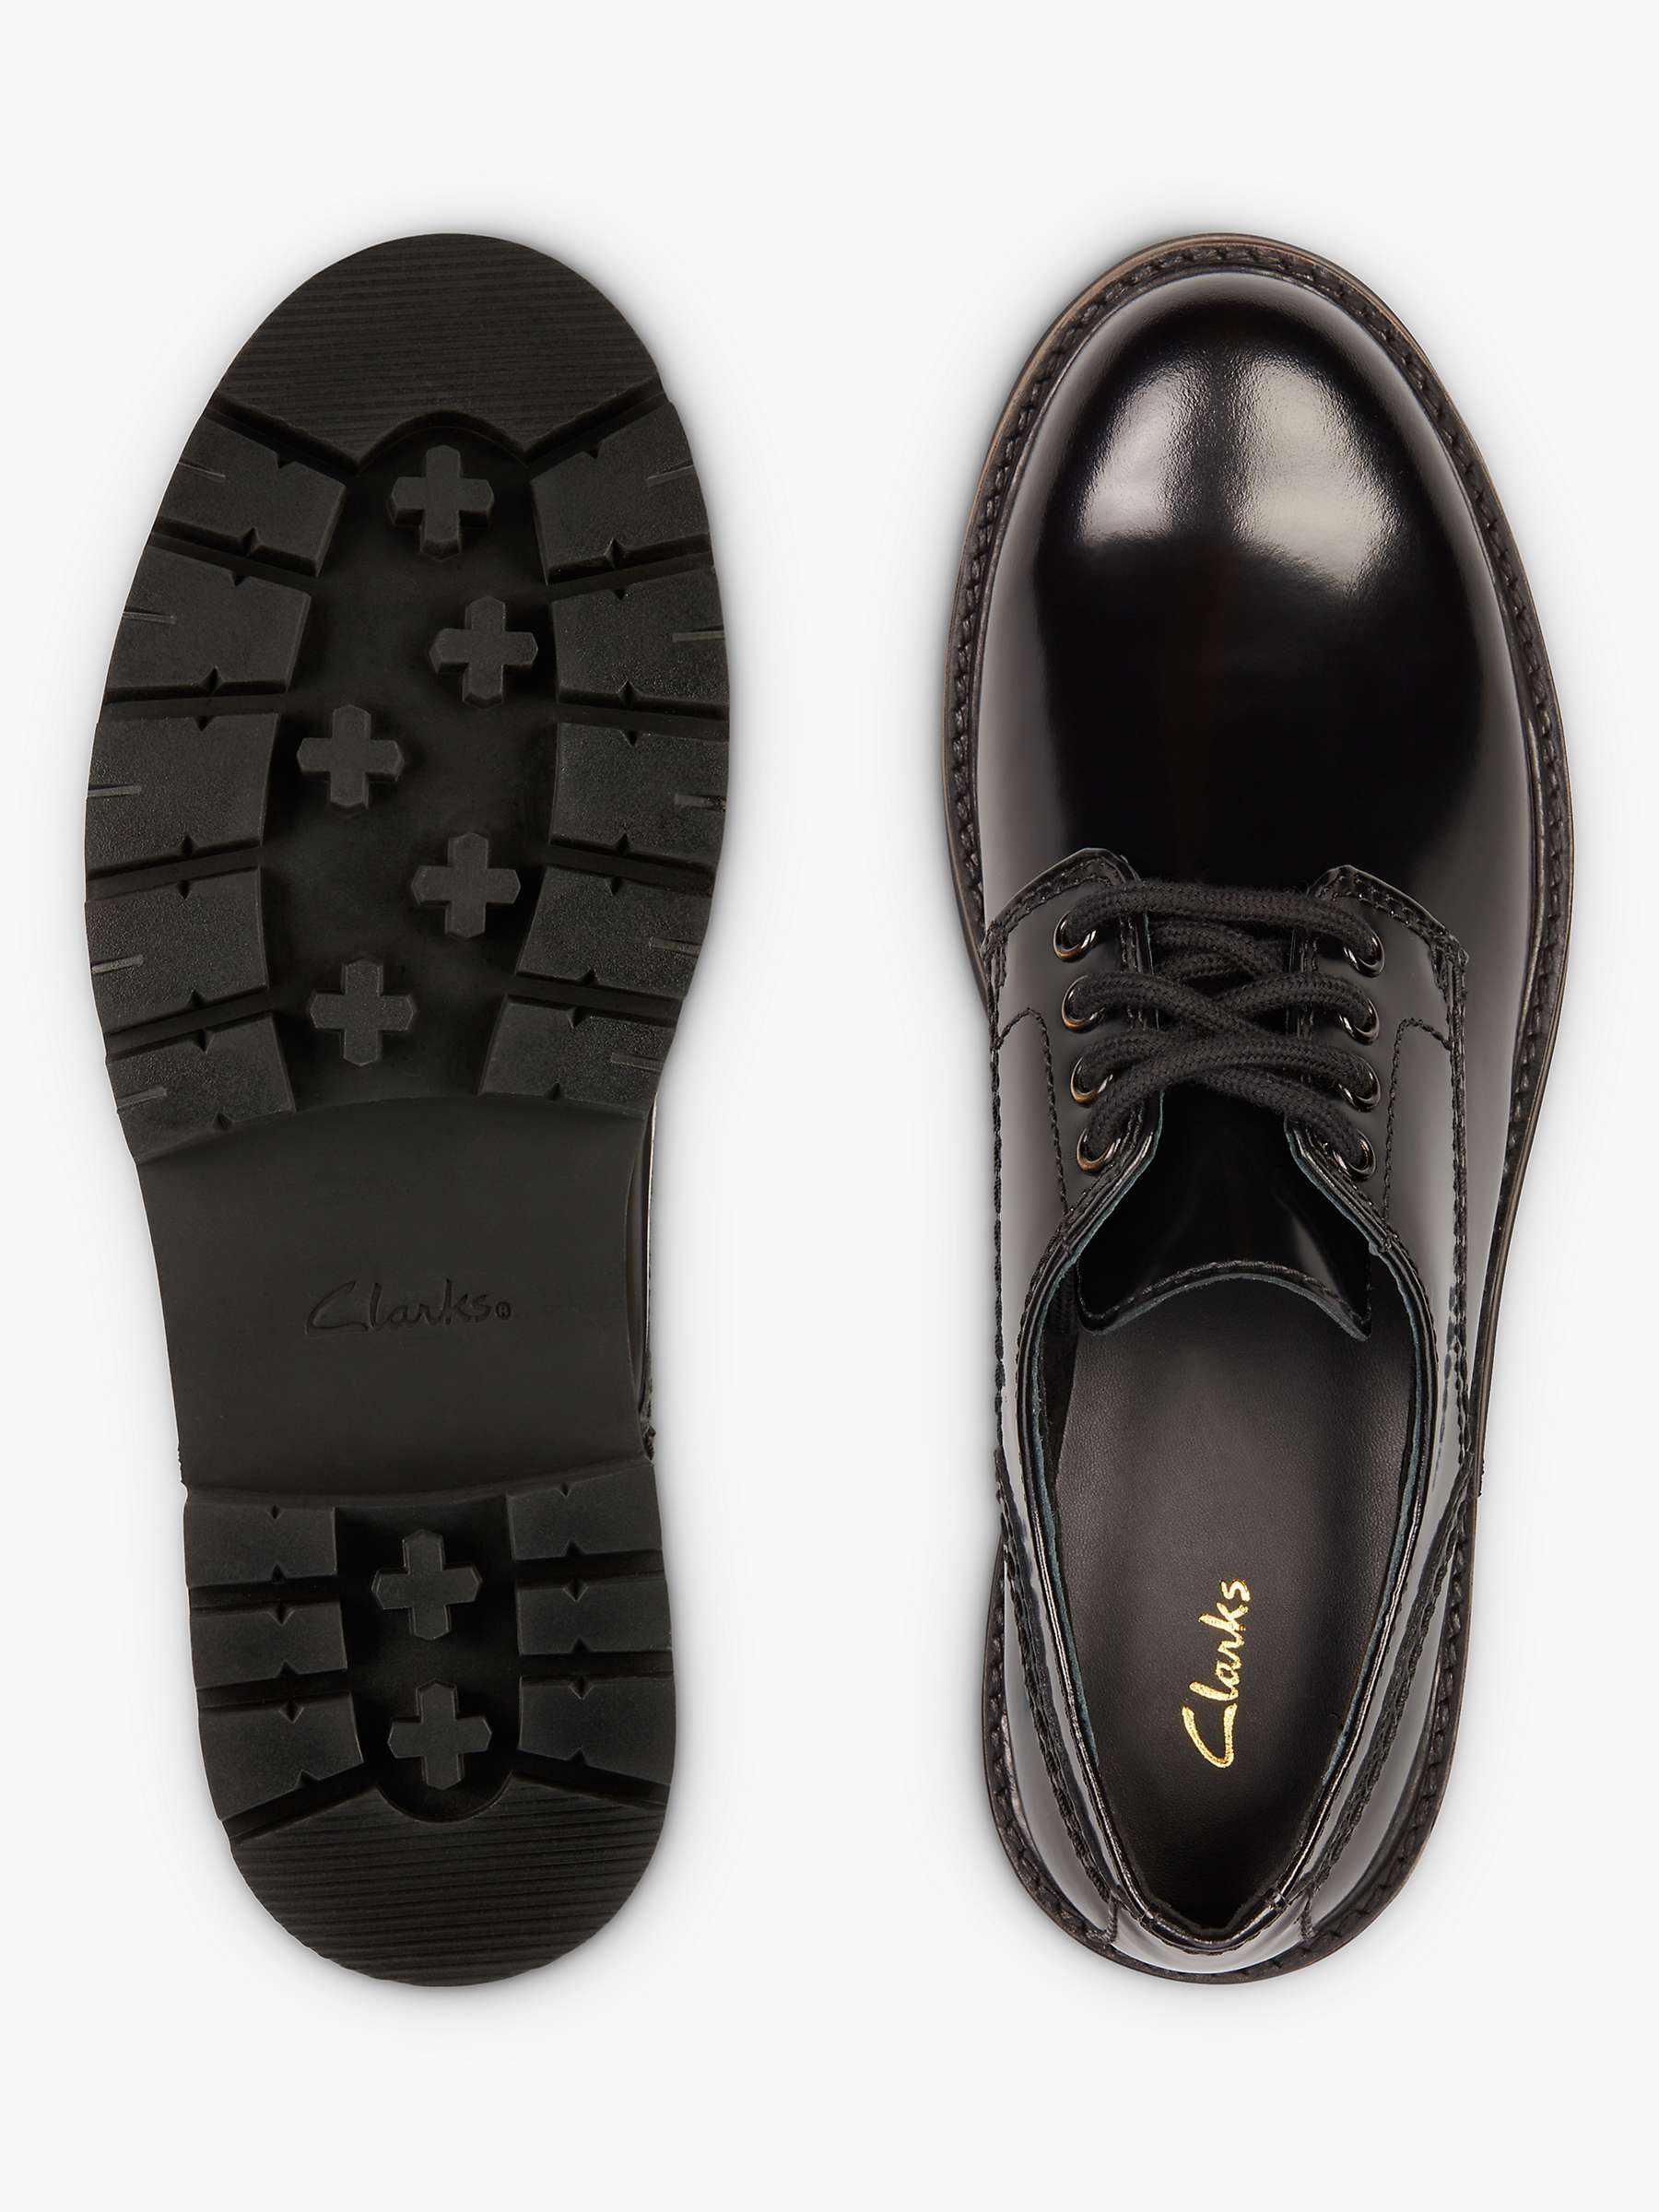 Clarks Orianna Leather Derby Shoes, Black at John Lewis & Partners